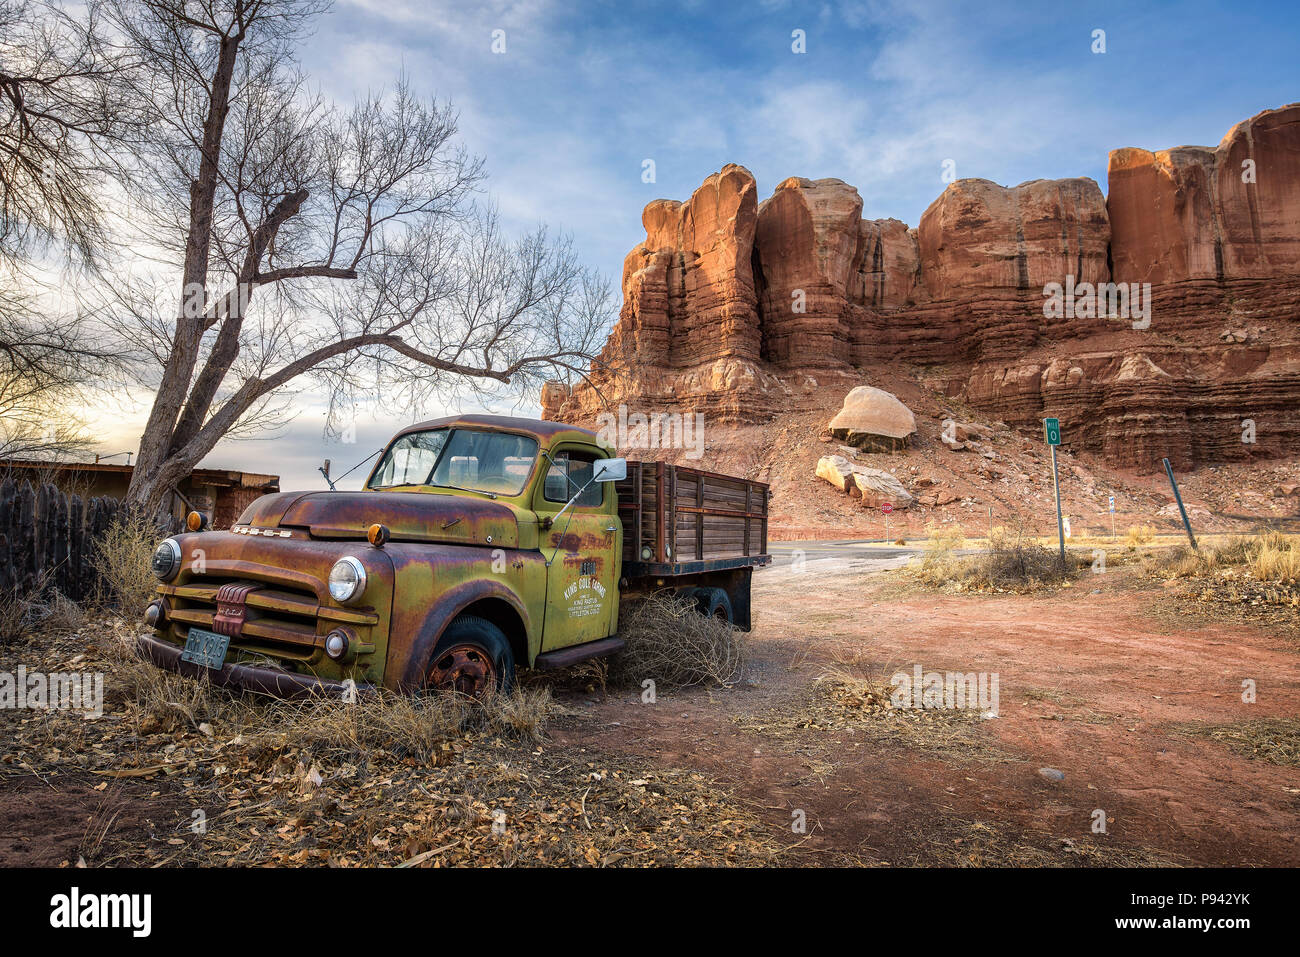 Deserted Dodge pickup vehicle parked near Twin Rocks trading post in Bluff, Utah Stock Photo